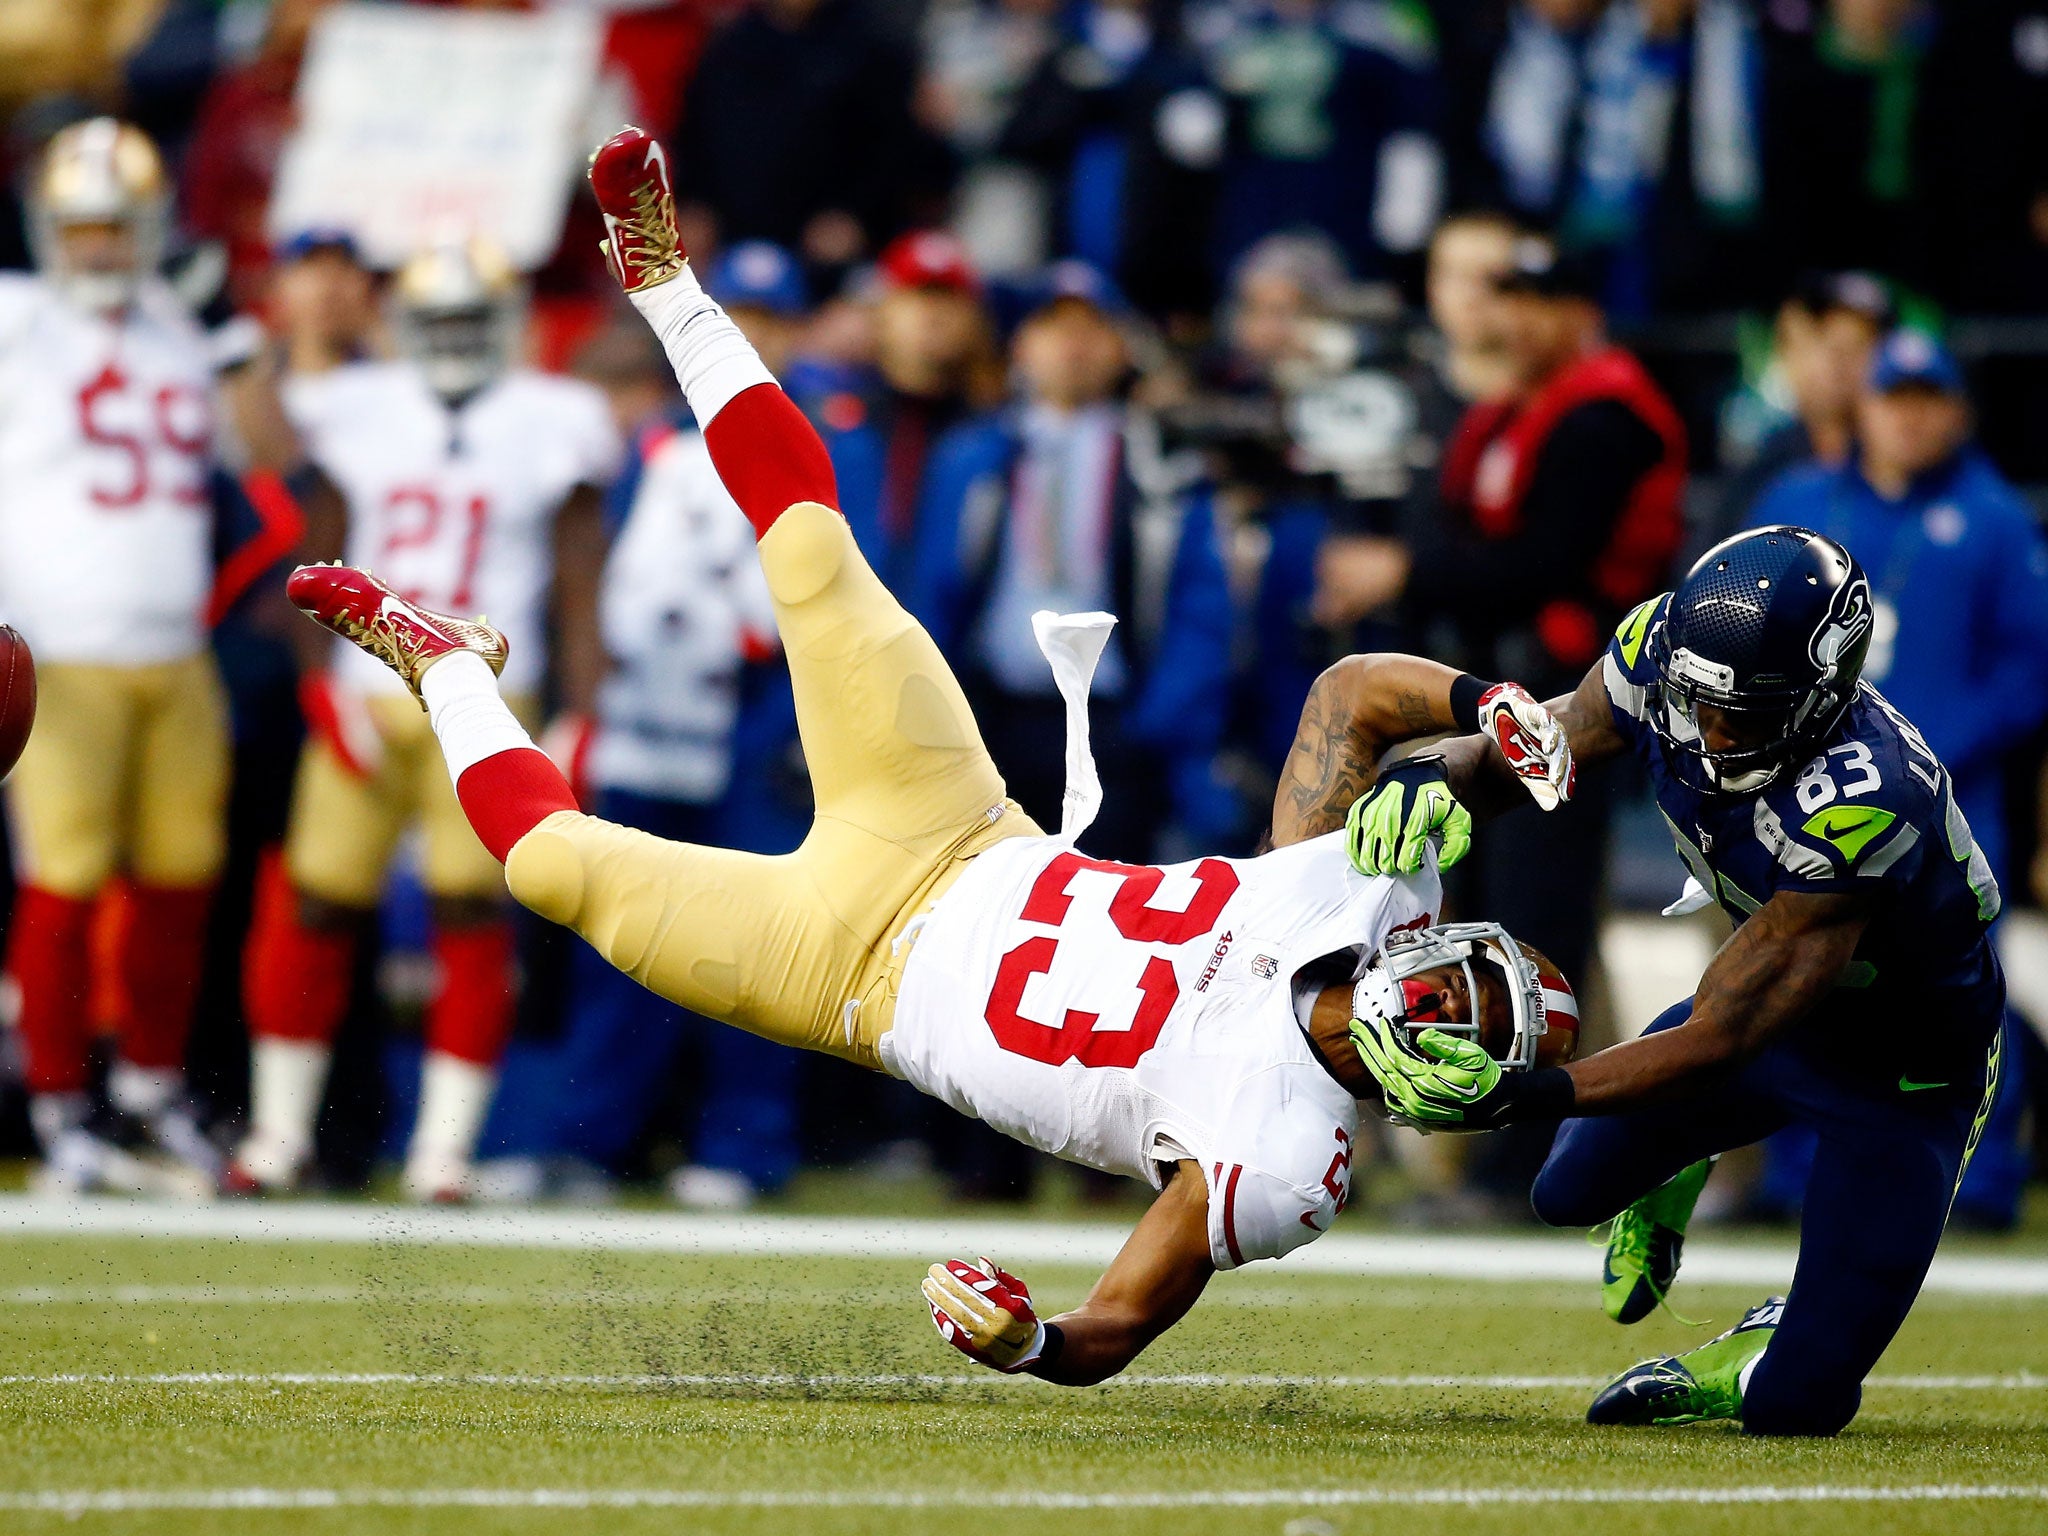 Kick returner LaMichael James of the San Francisco 49ers takes a hit to the head from the Seattle Seahawks' wide receiver Ricardo Lockette earlier this month